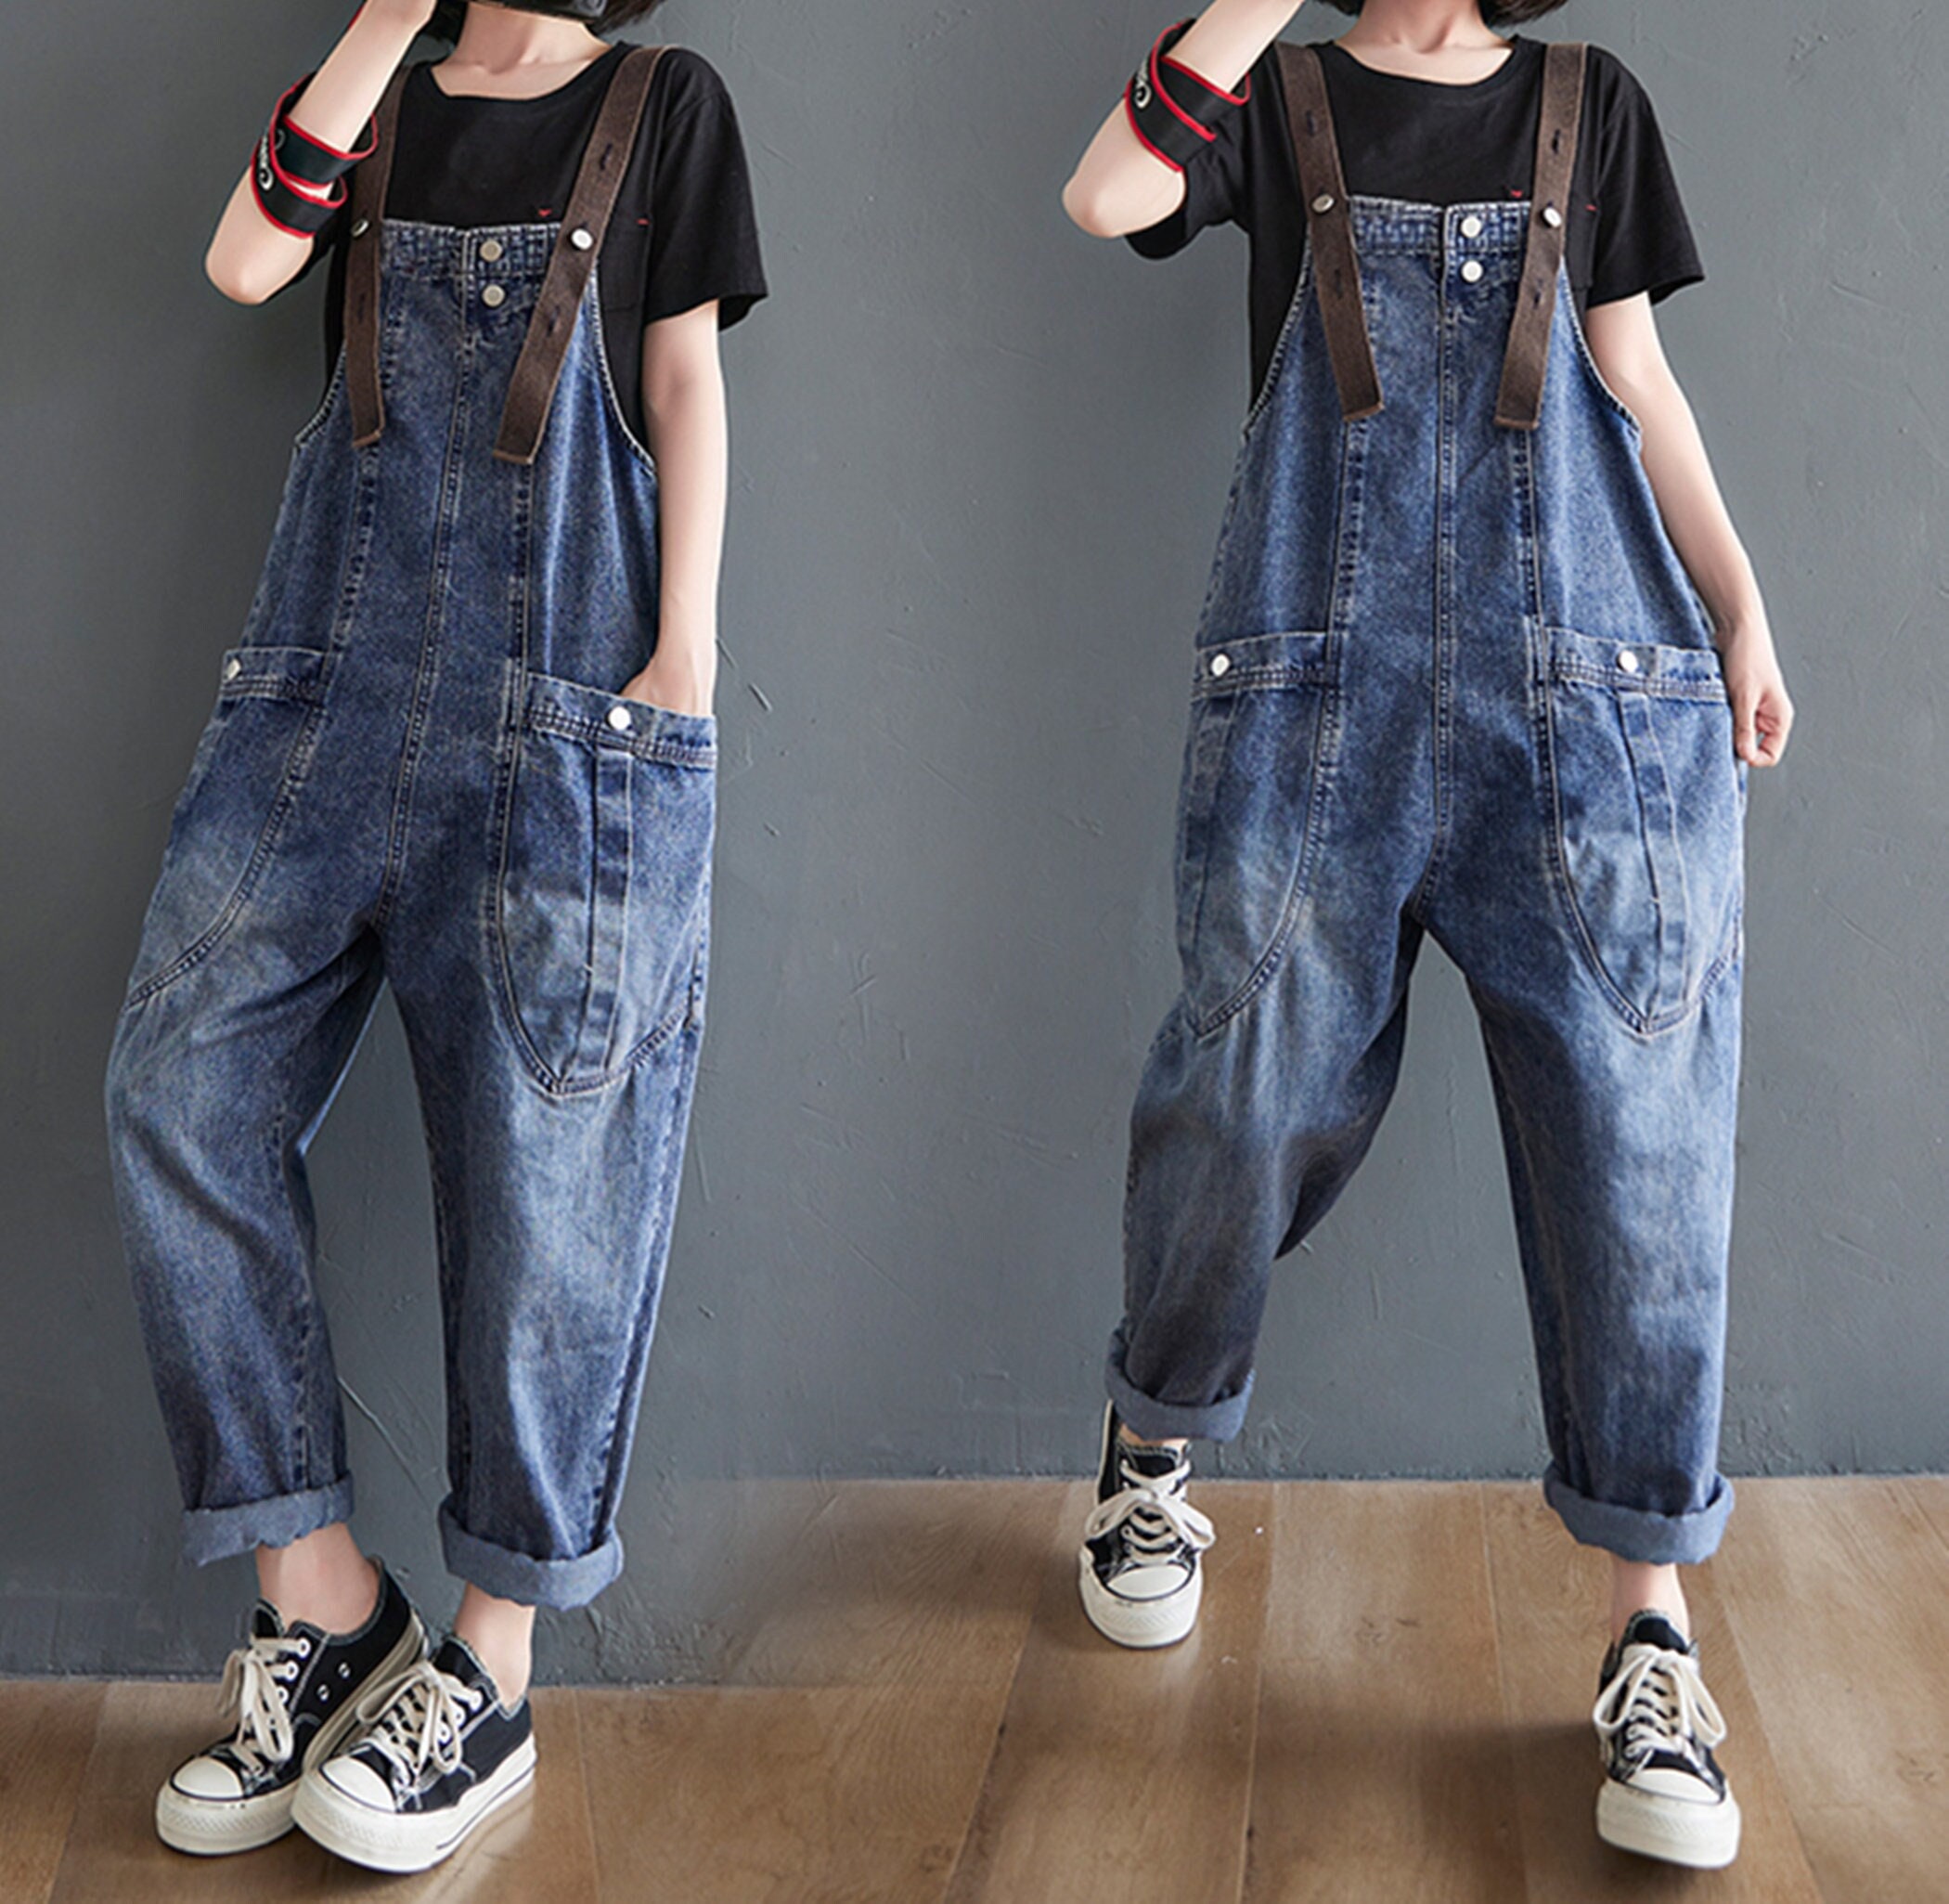 Retro Denim Overalls Baggy Jeans Jumpsuits Wide Leg Overall - Etsy